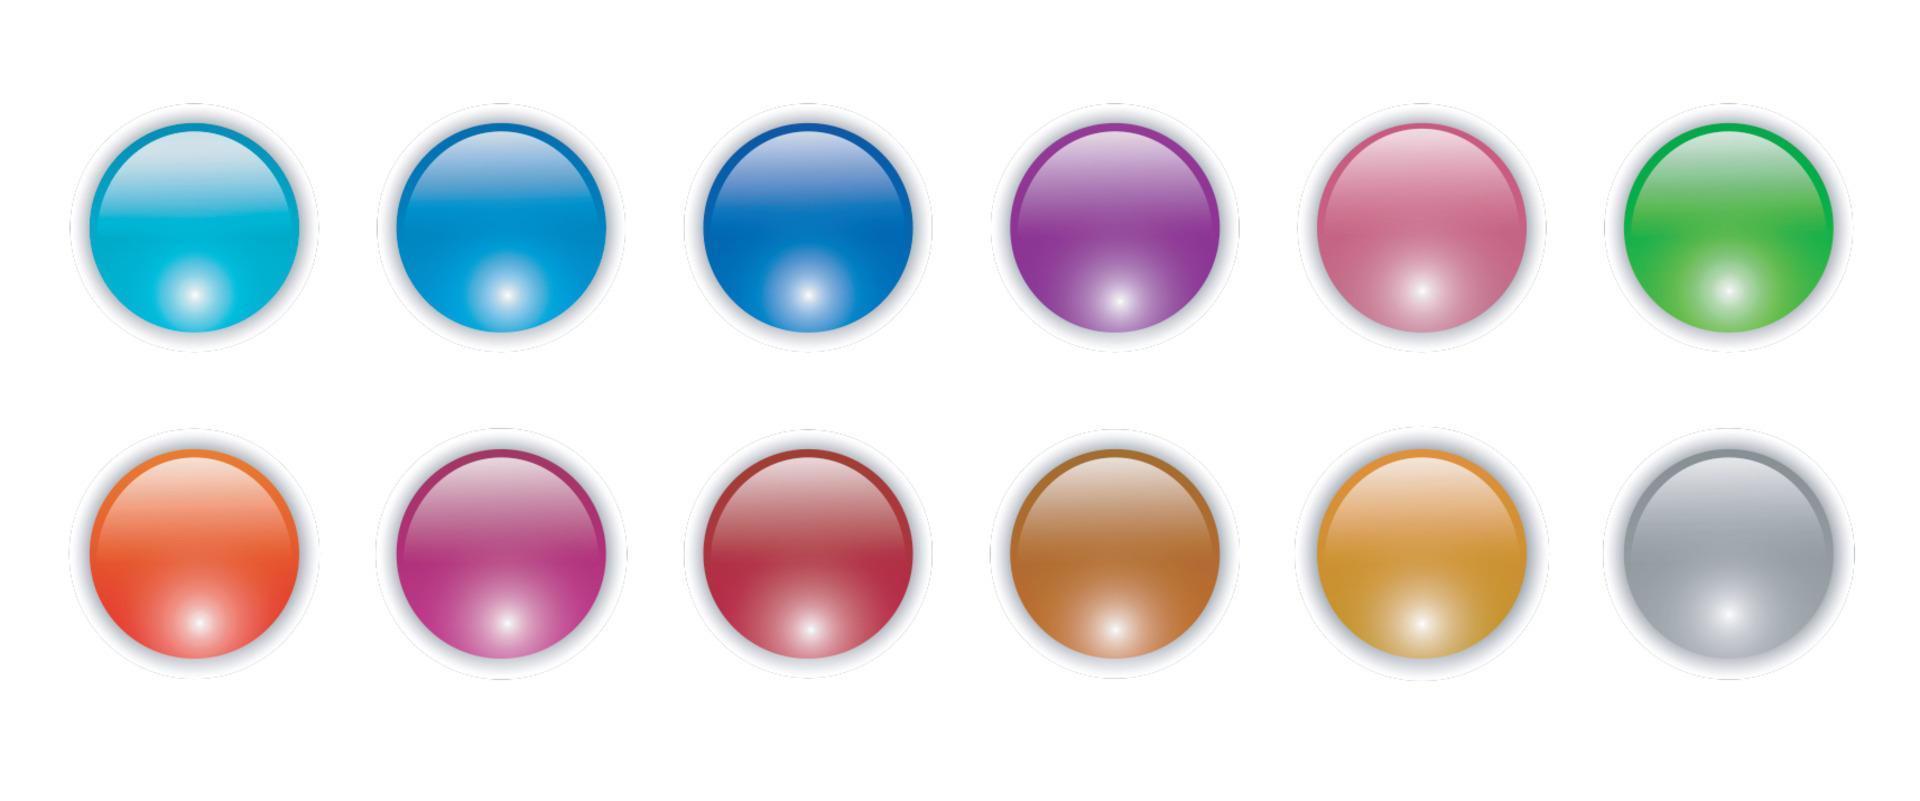 Shiny buttons set, glossy circle icons multicolored collection vector